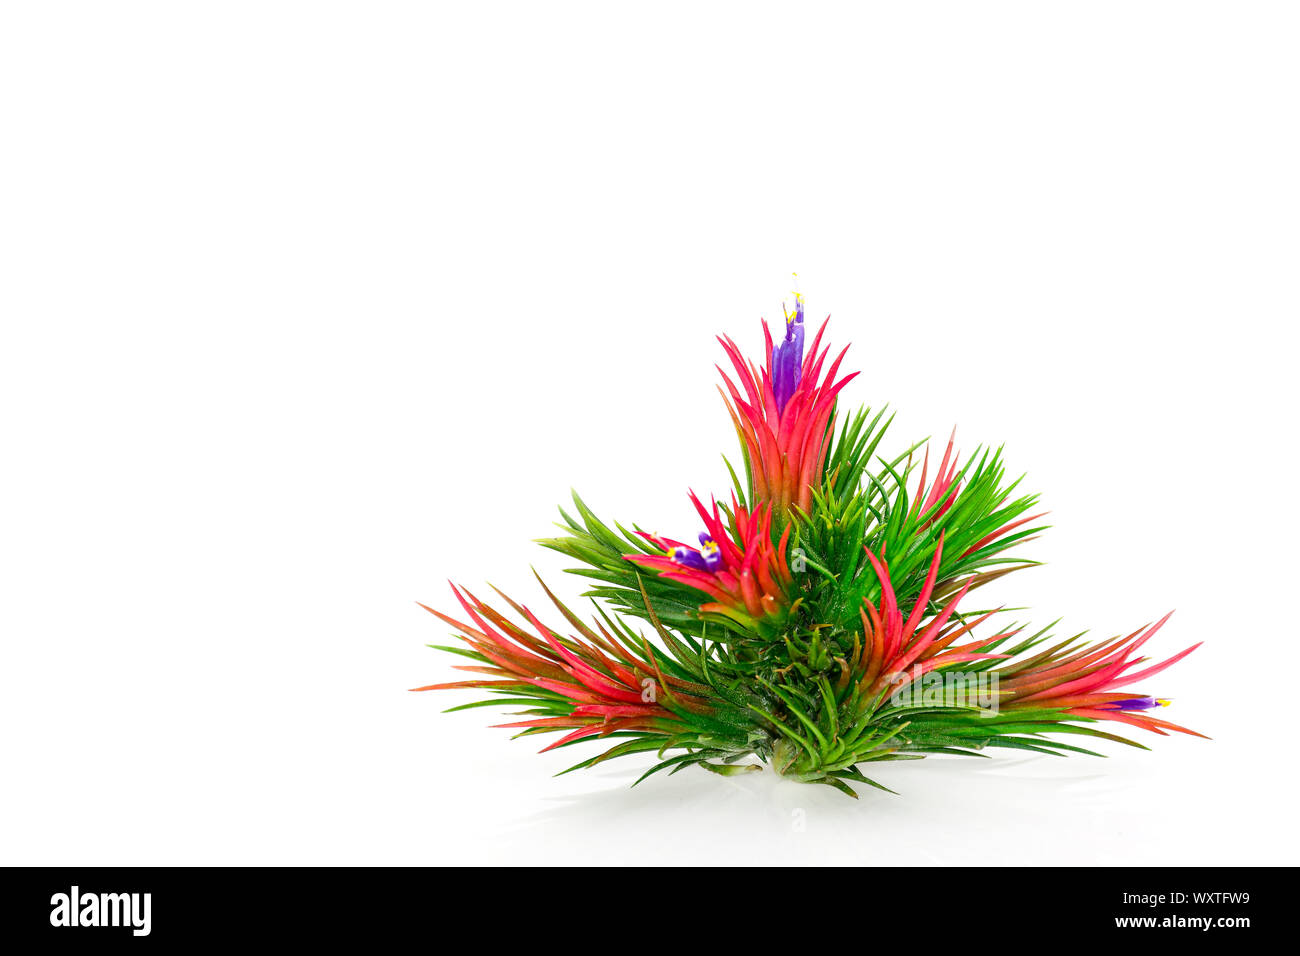 illandsia with flowers on white background. Stock Photo